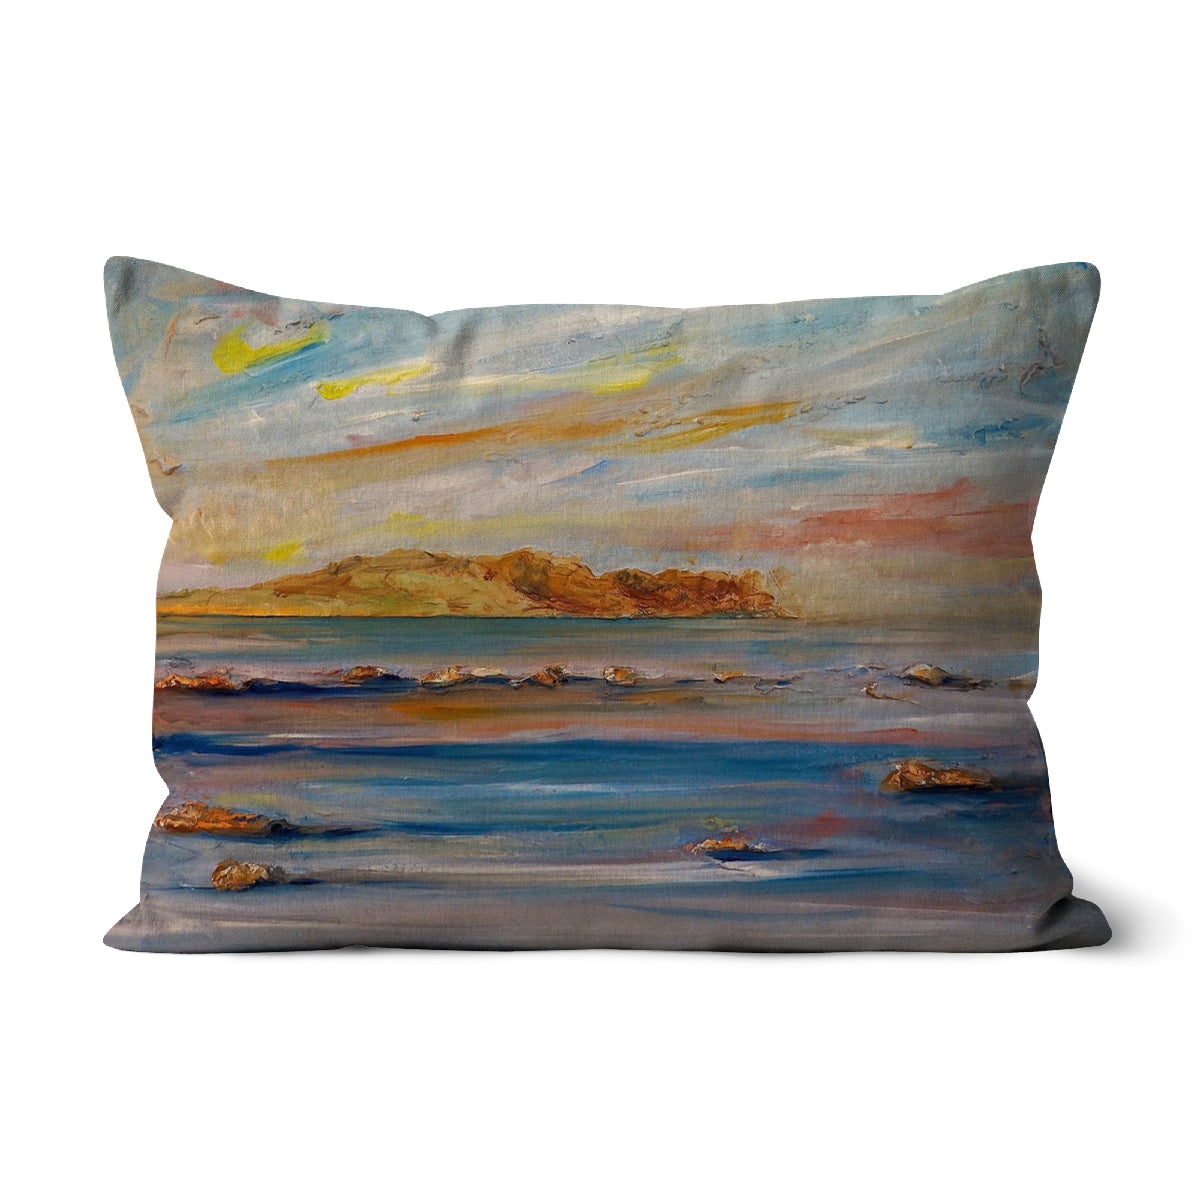 Tiree Dawn Art Gifts Cushion-Cushions-Hebridean Islands Art Gallery-Faux Suede-19"x13"-Paintings, Prints, Homeware, Art Gifts From Scotland By Scottish Artist Kevin Hunter